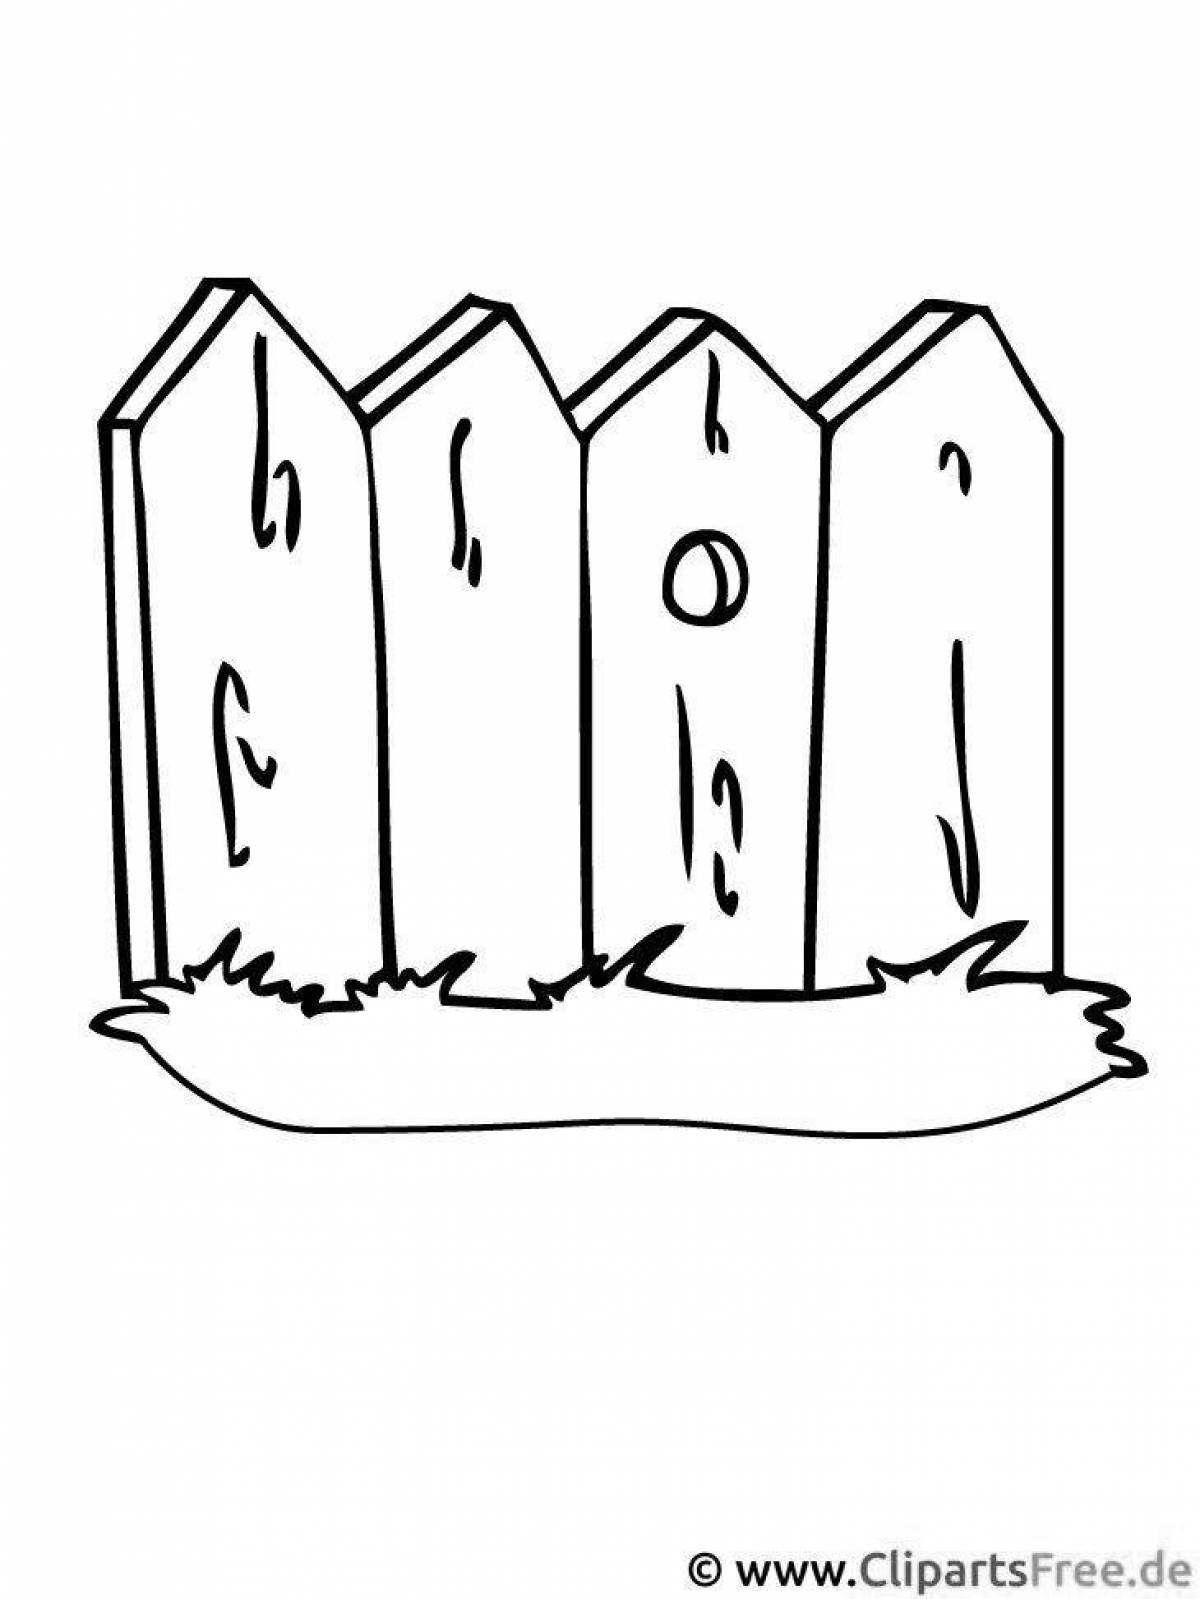 Glitter fence coloring page